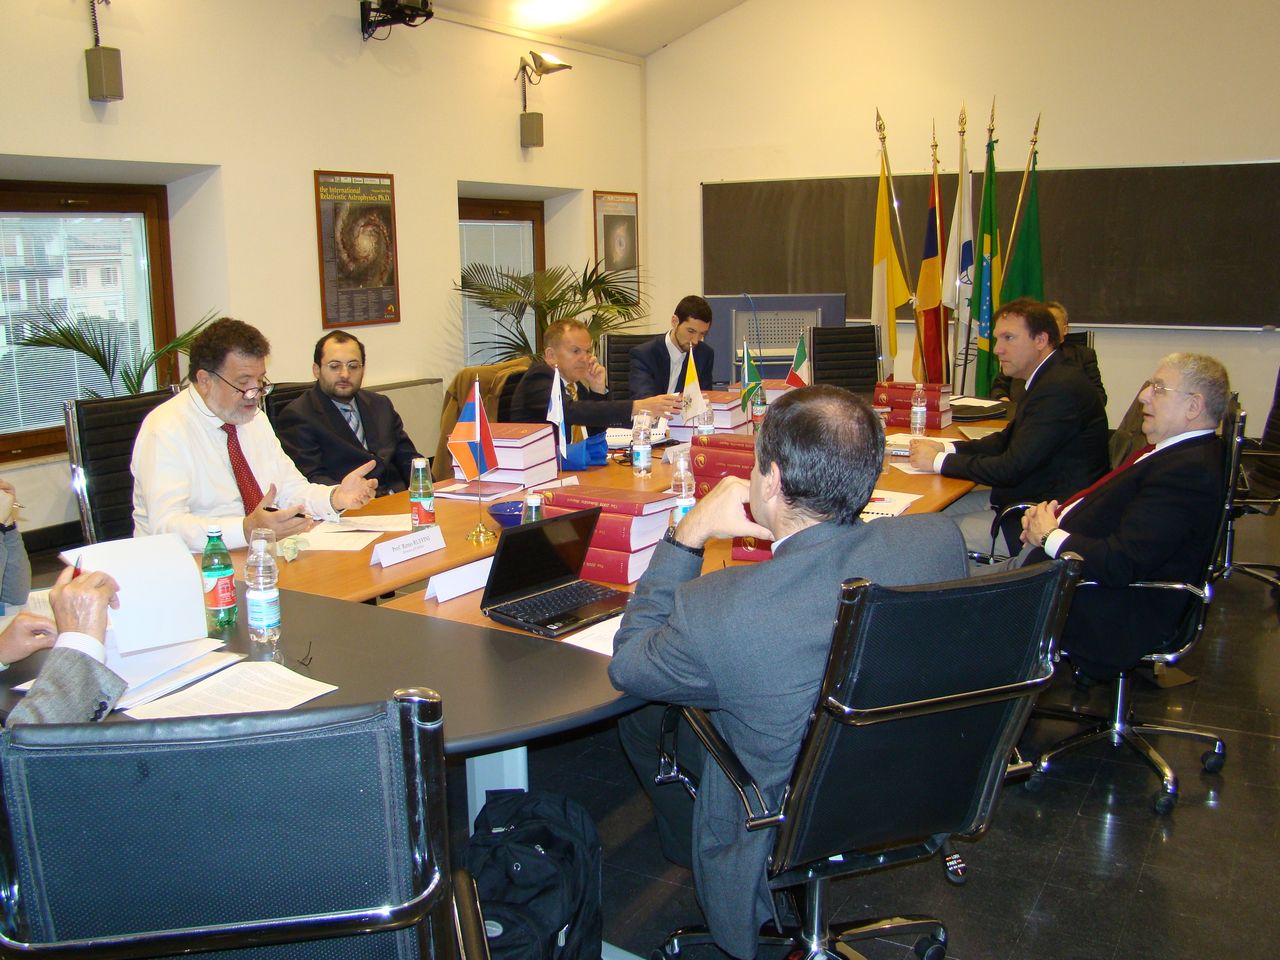 Representing the Specola Vaticana at the ICRANet board of directors meeting in
                                        2009. The rightmost person is Riccardo Giacconi, one of the fathers of X-ray
                                        astronomy.